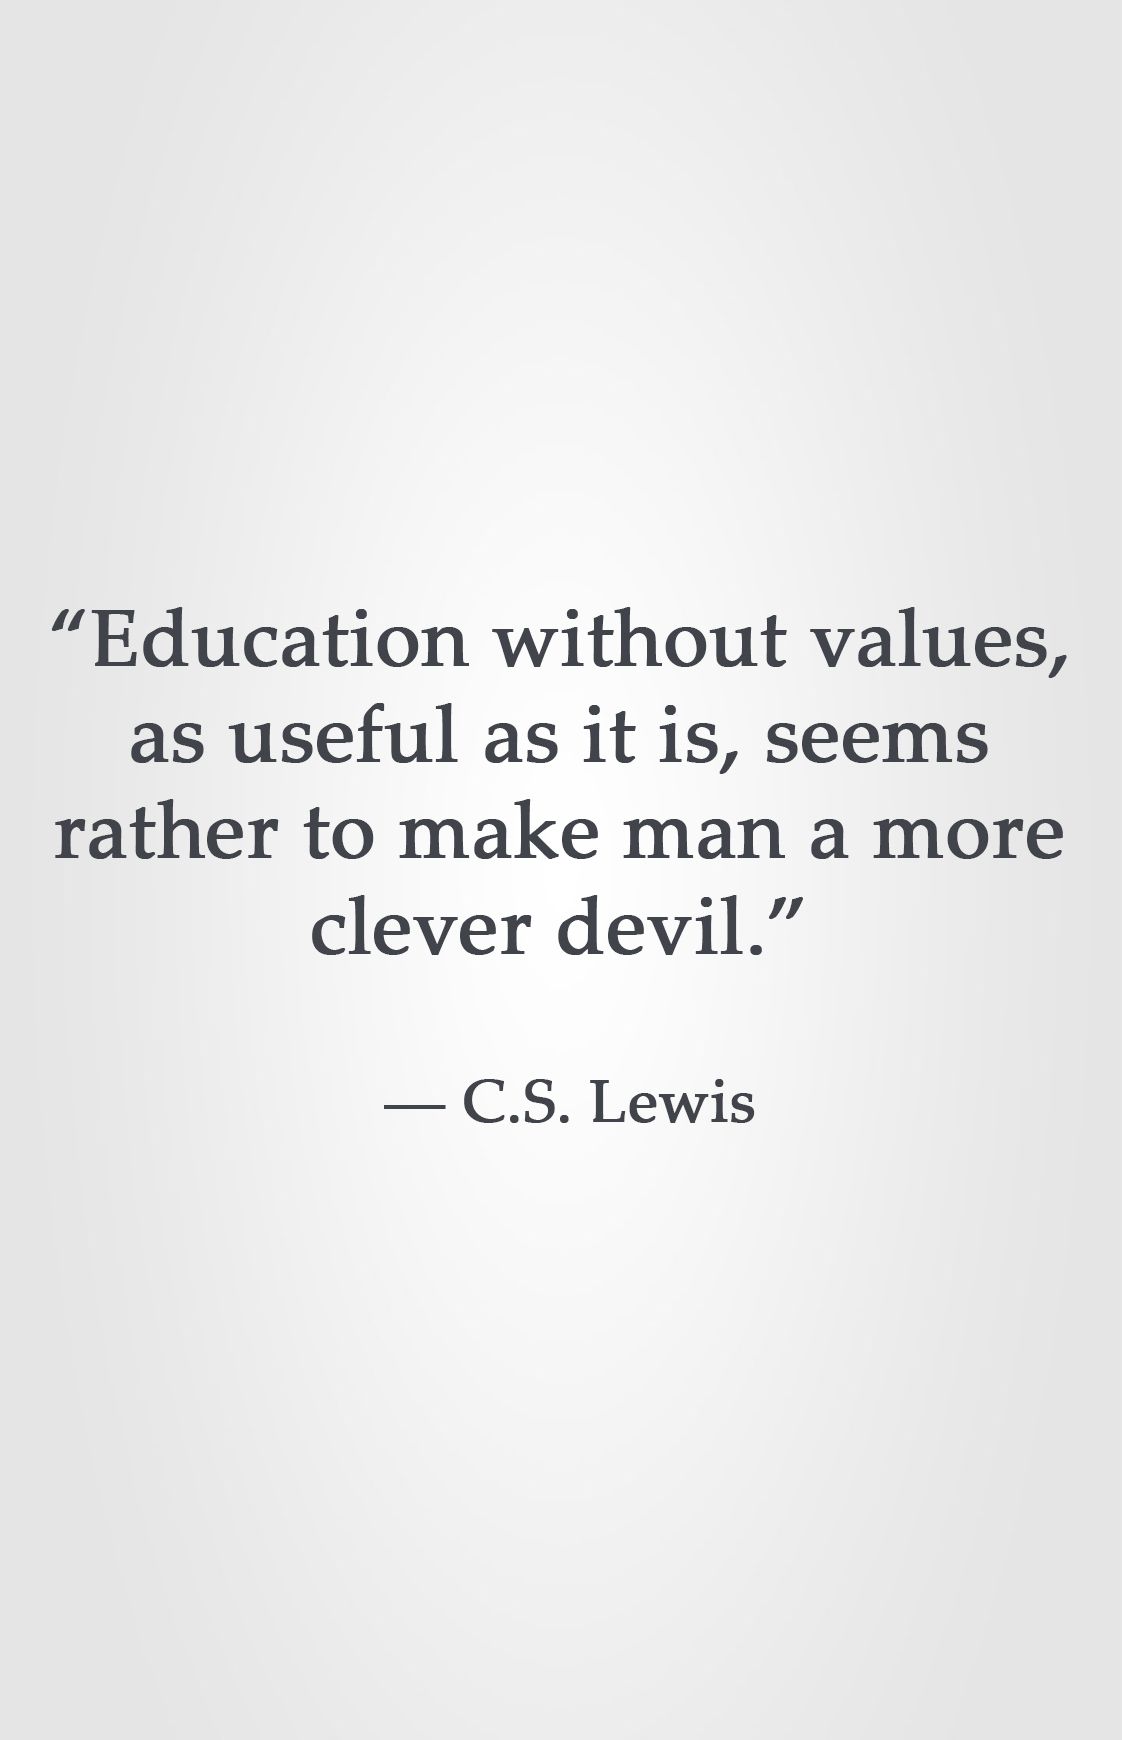 Education without values, as useful as it is, seems rather to make man a cleverer devil.